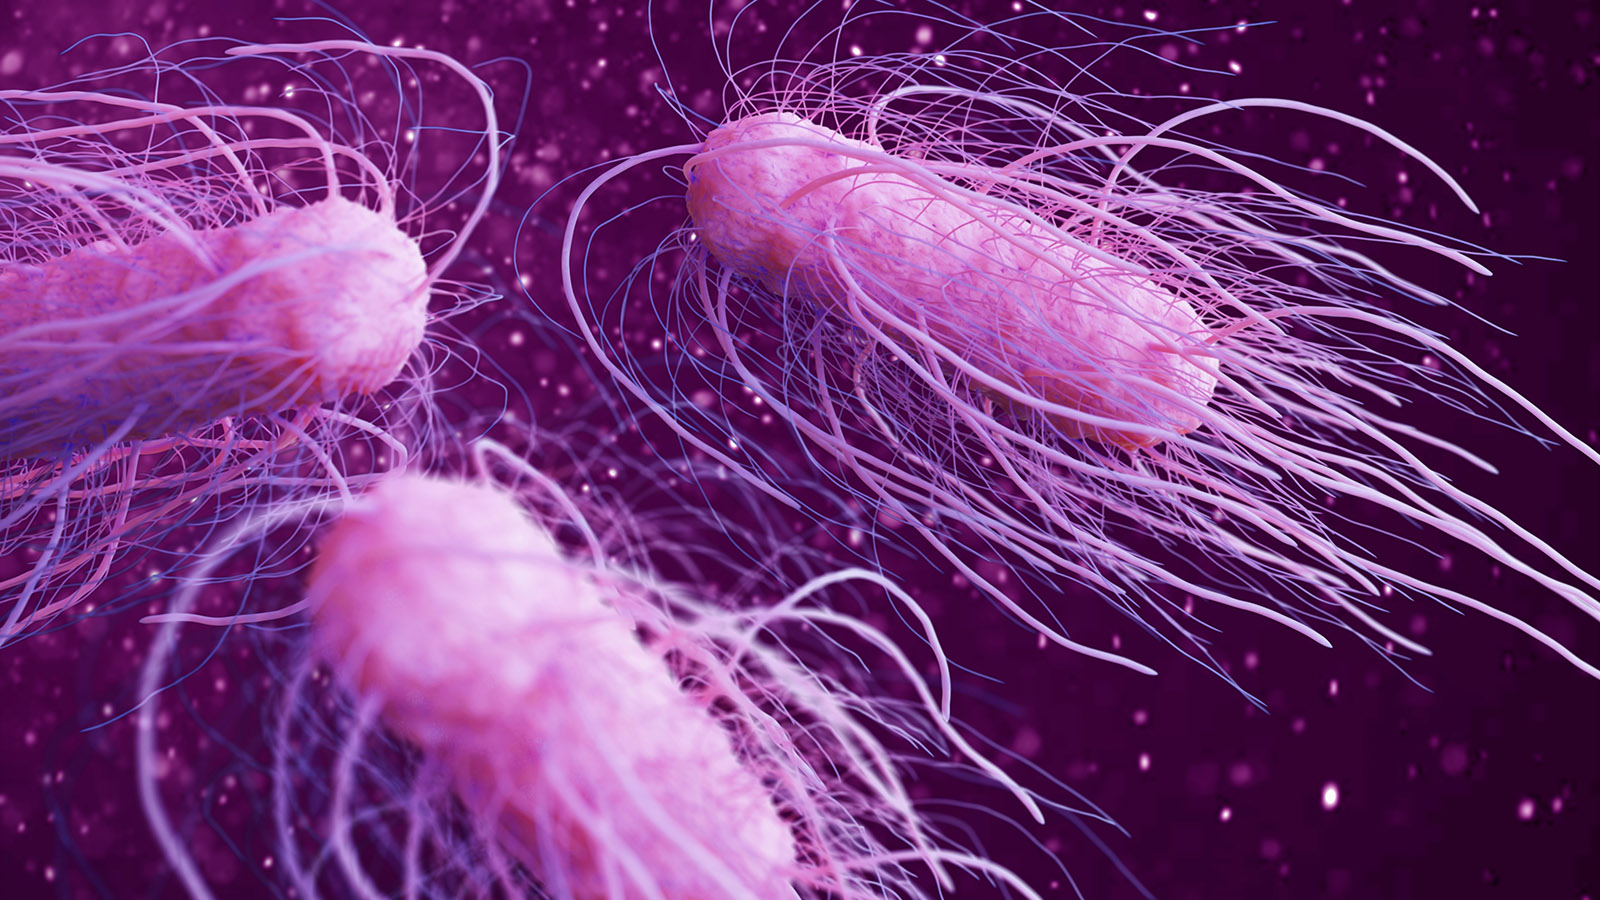 Light pulses can stop dangerous food poisoning like Salmonella